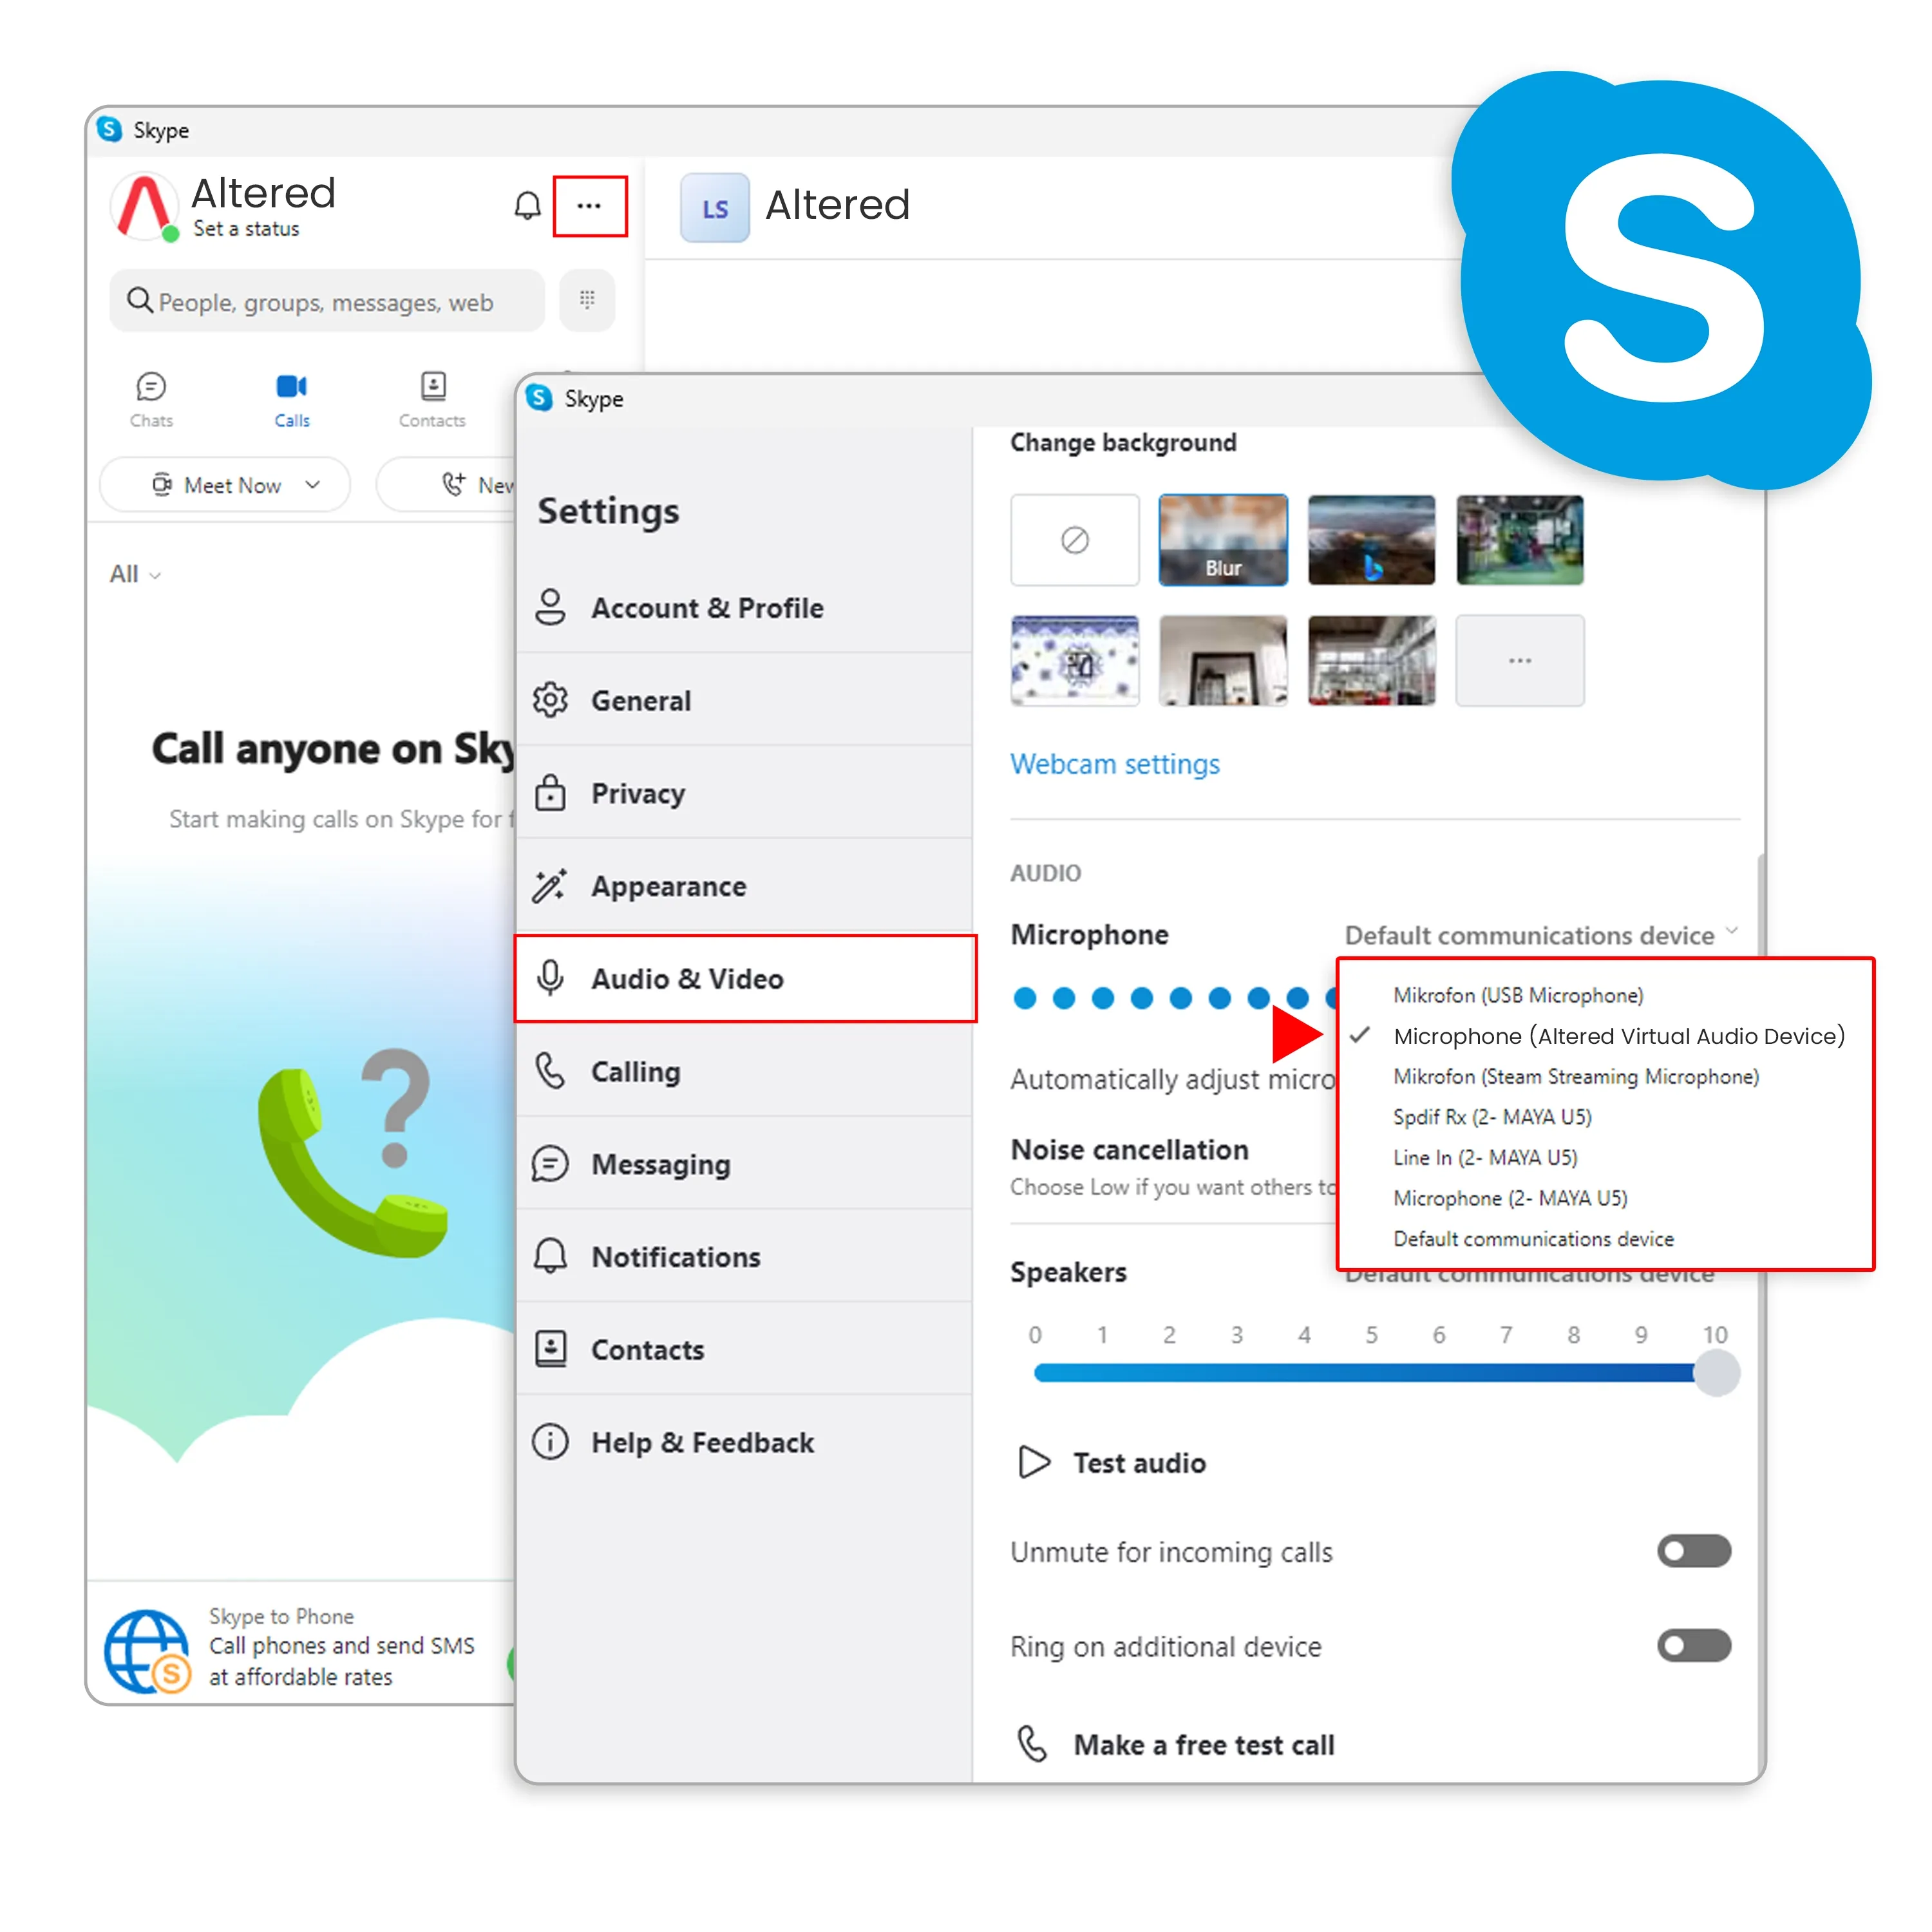 How to use Real-Time in Skype